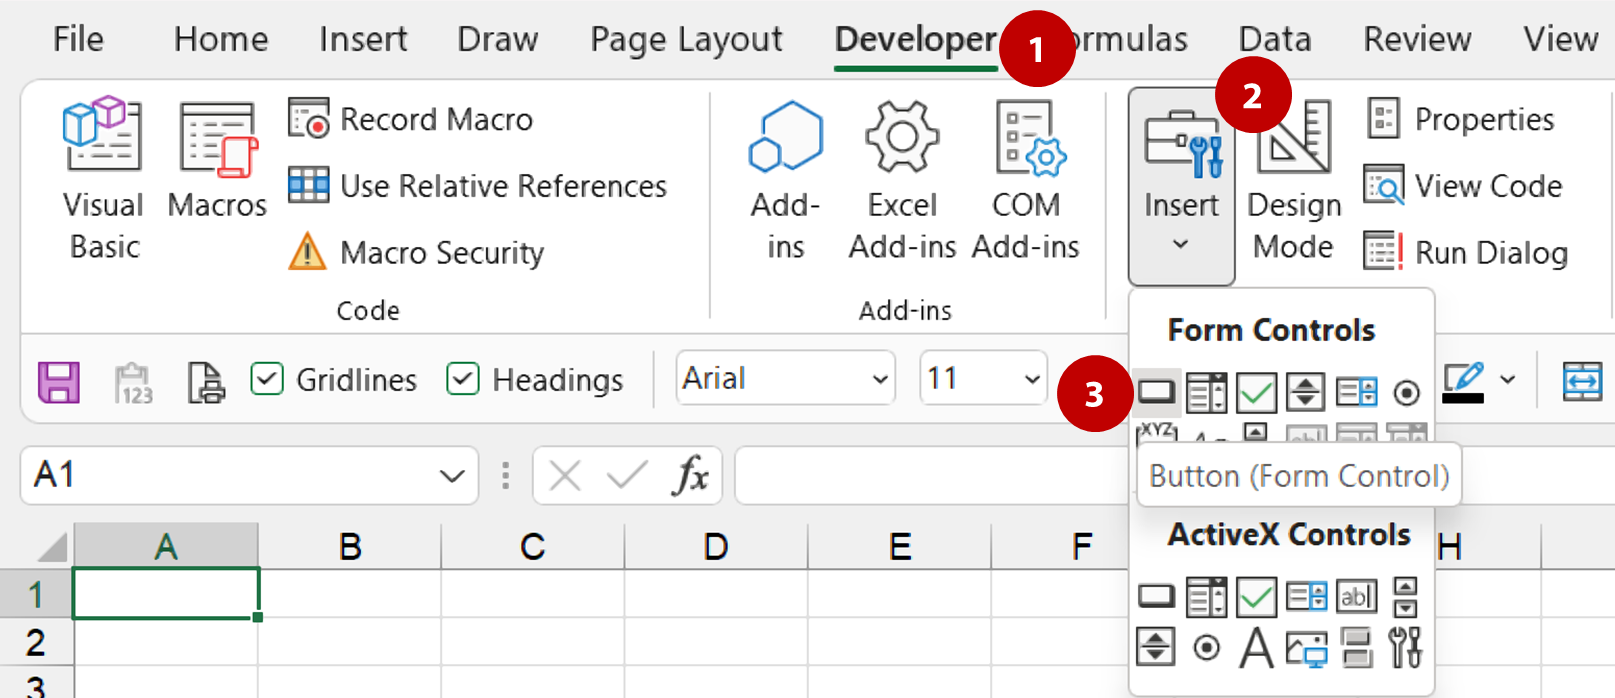 Steps 1 to 3 - Run a macro - Insert form button